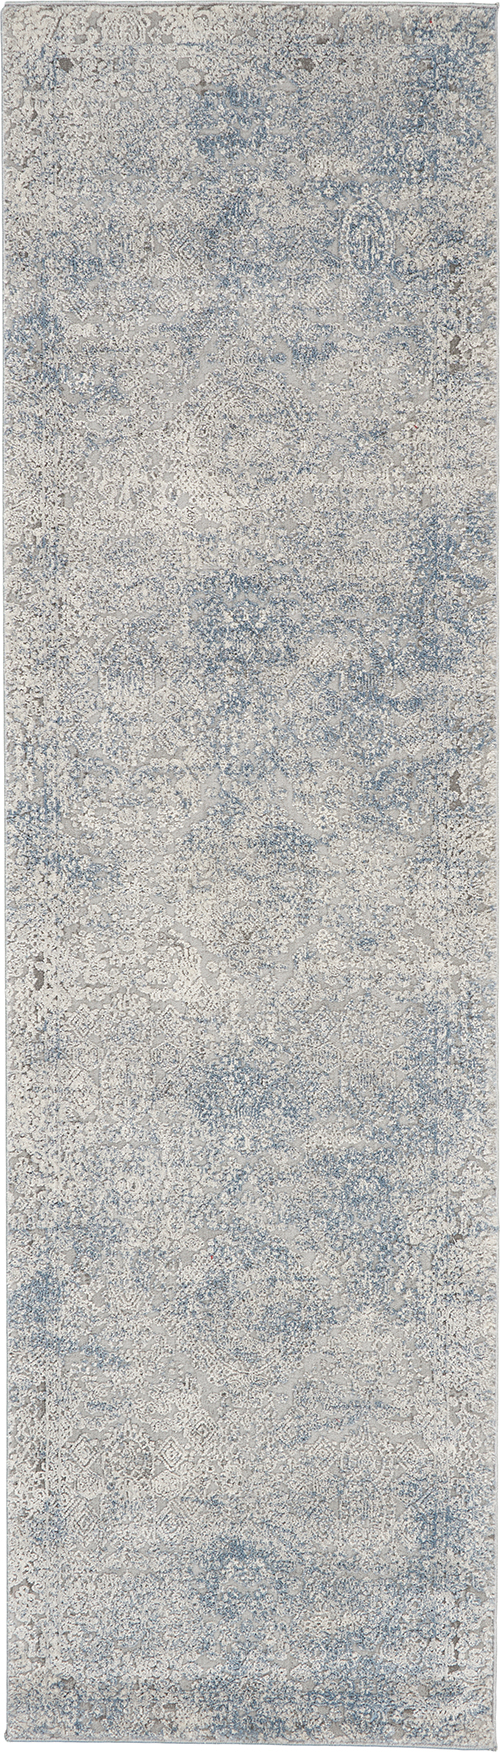 Nourison Rugs - Rustic Textures Runner RUS09 Rug in Ivory / Light Blue - 2.3m x 0.66m